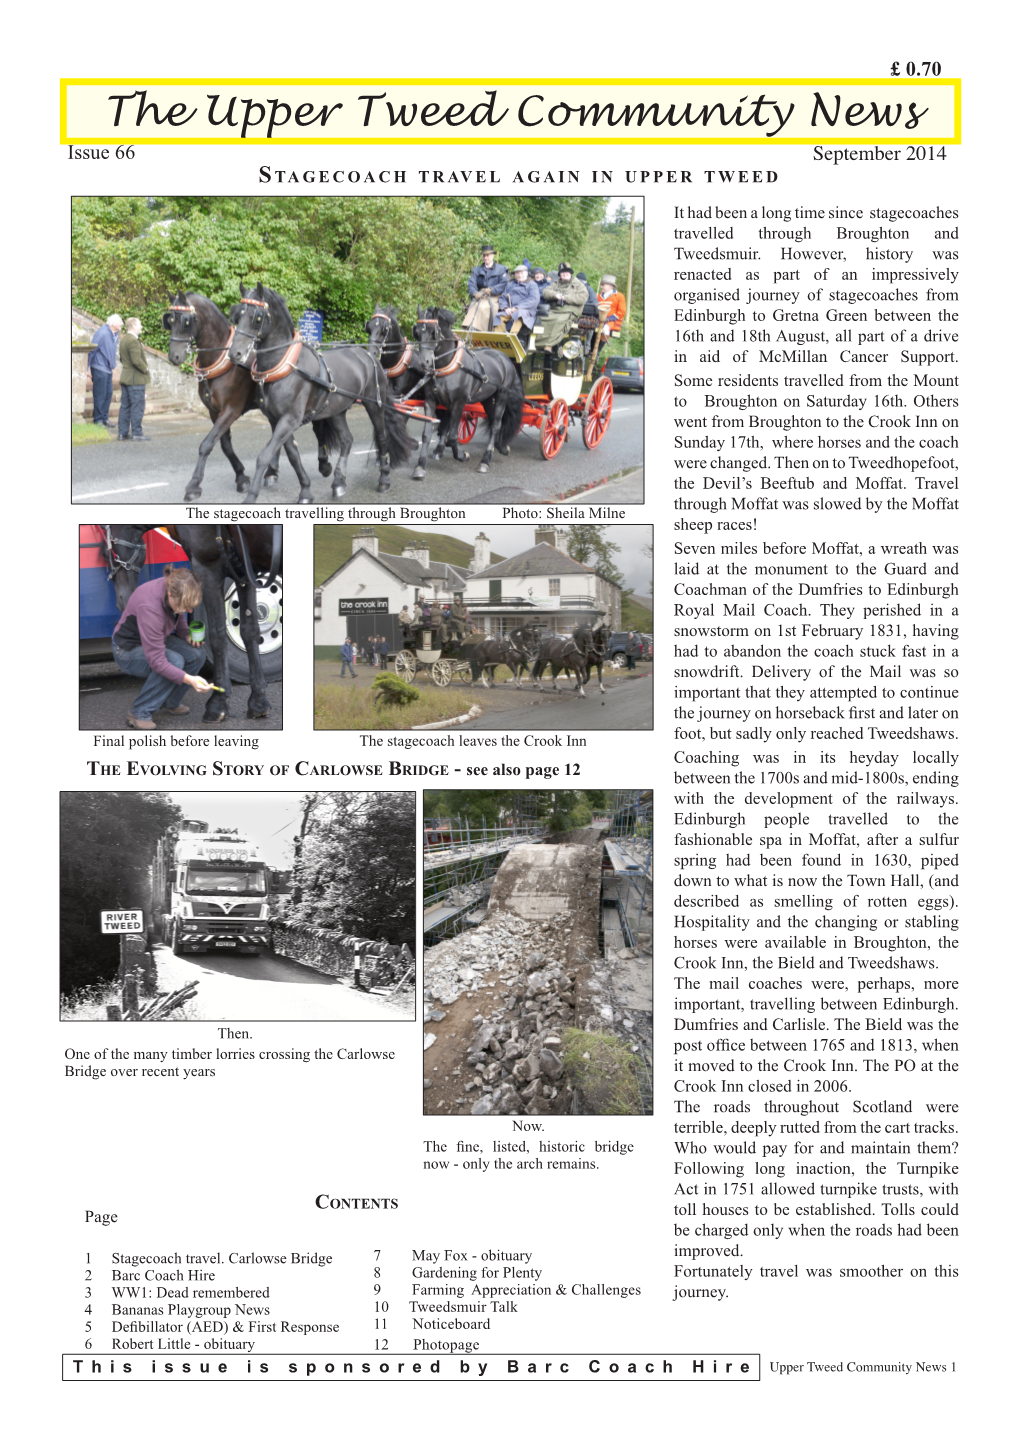 The Upper Tweed Community News Issue 66 September 2014 S Tagecoach Travel Again in Upper Tweed